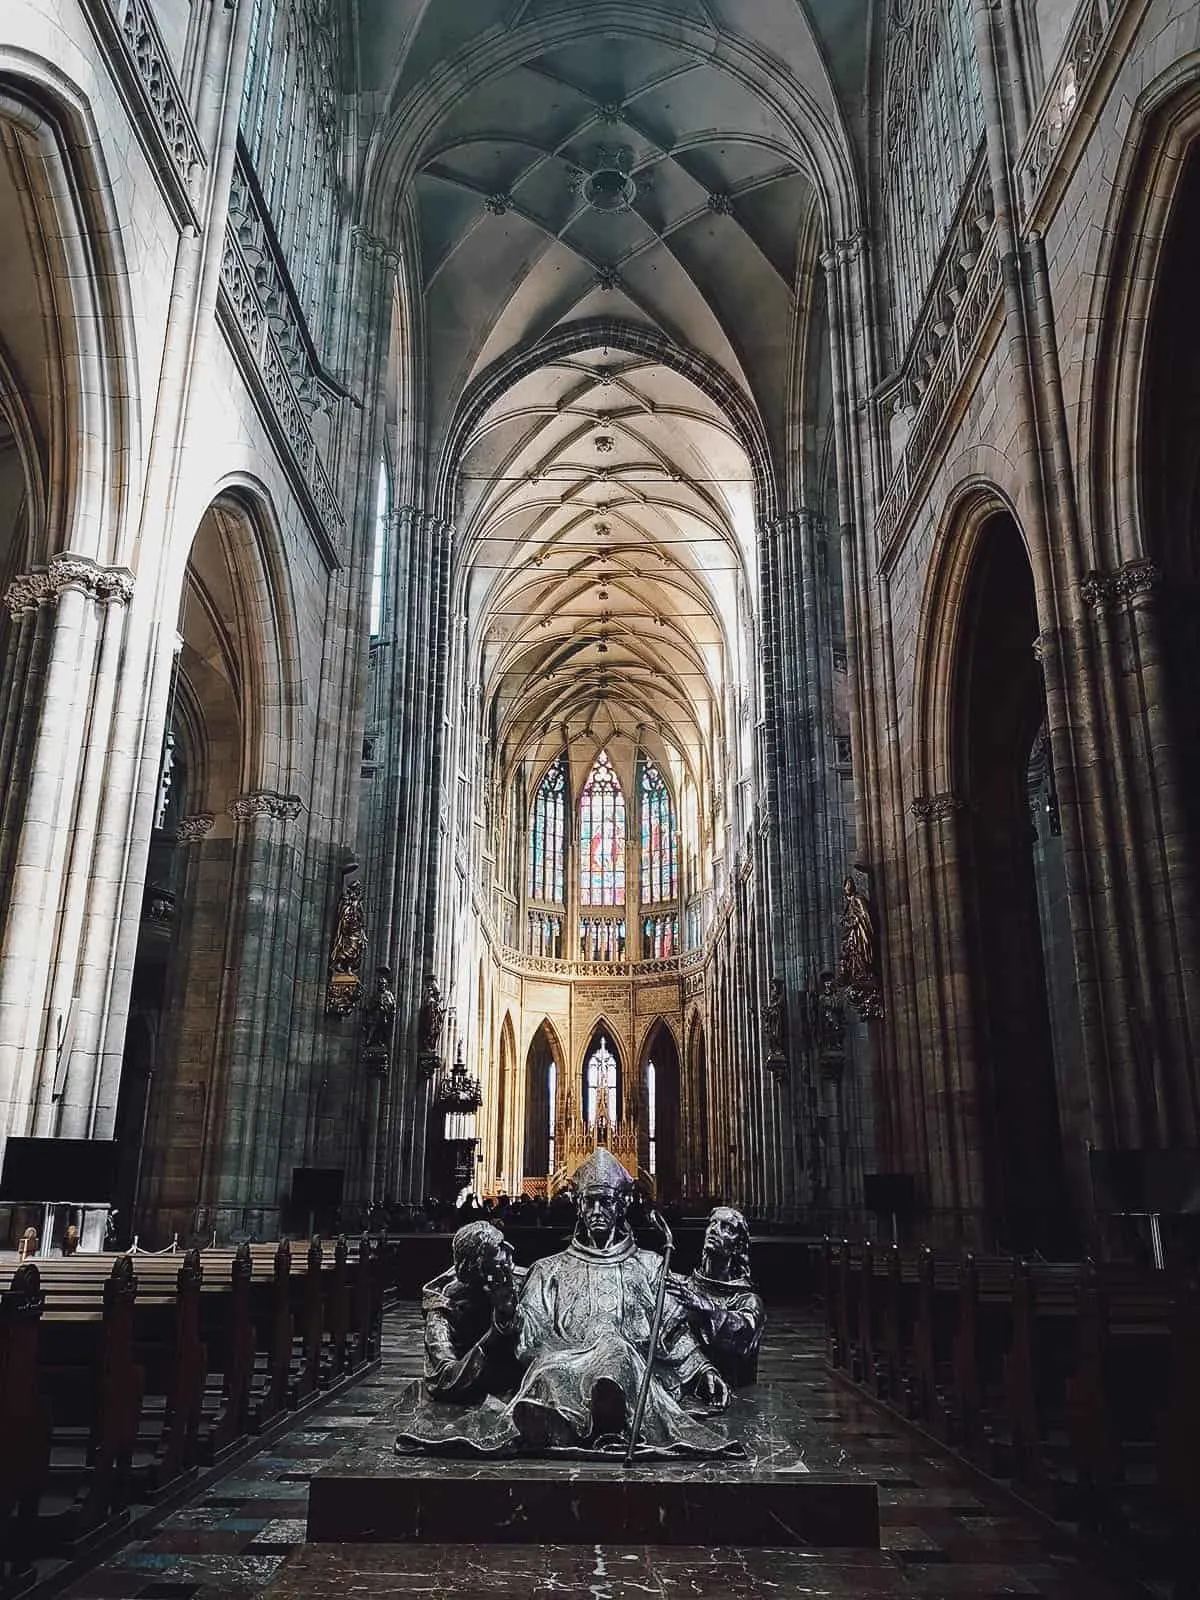 Inside St. Vitus Cathedral in Prague, Czechia